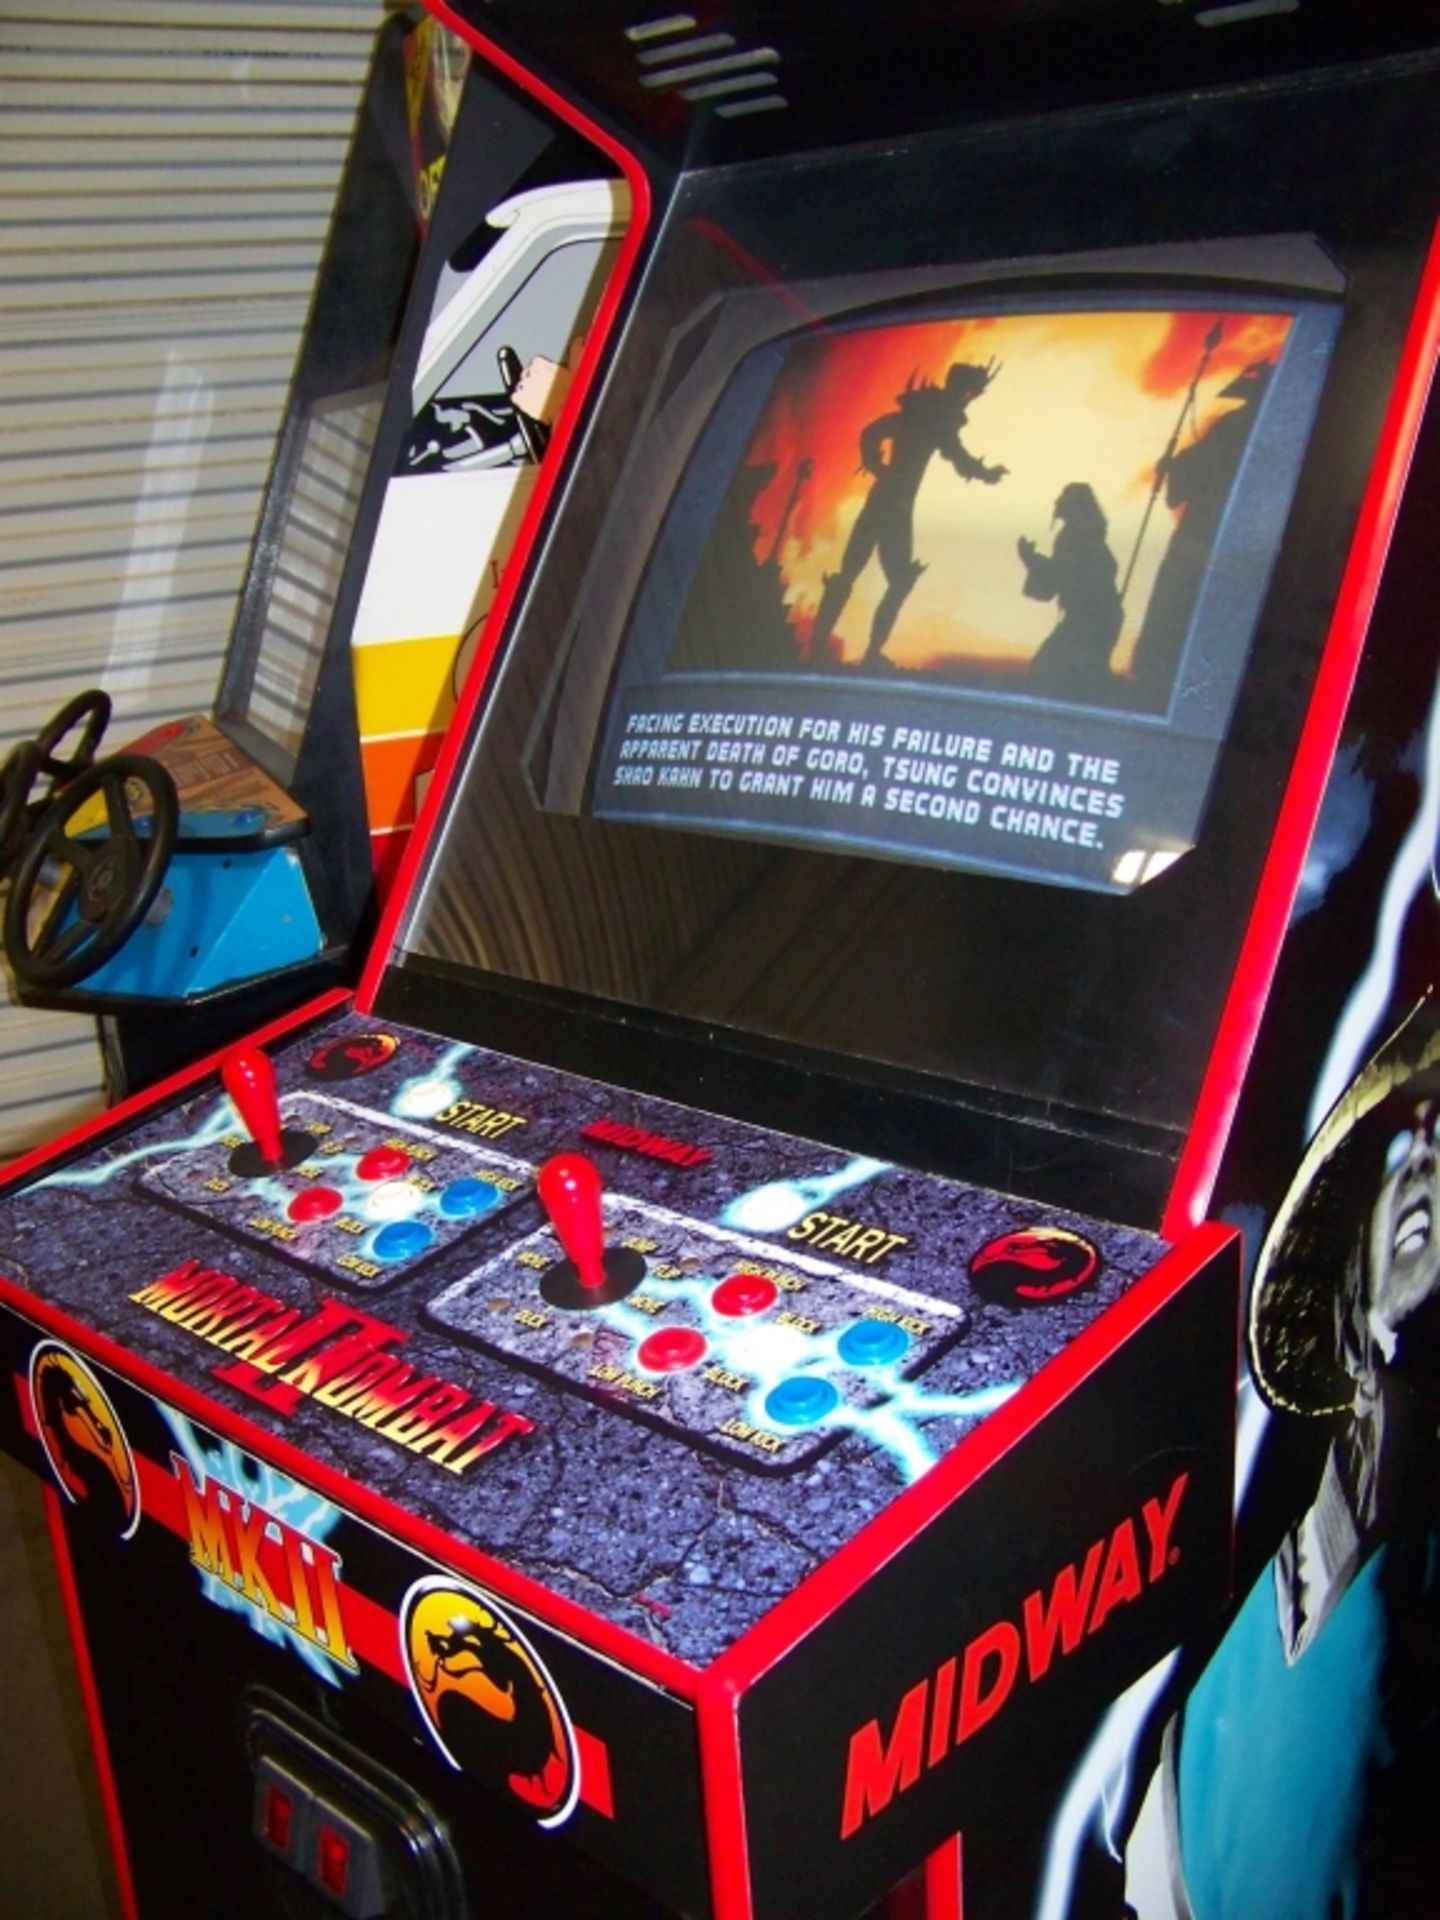 MORTAL KOMBAT II ARCADE GAME MIDWAY Item is in used condition. Evidence of wear and commercial - Image 3 of 8